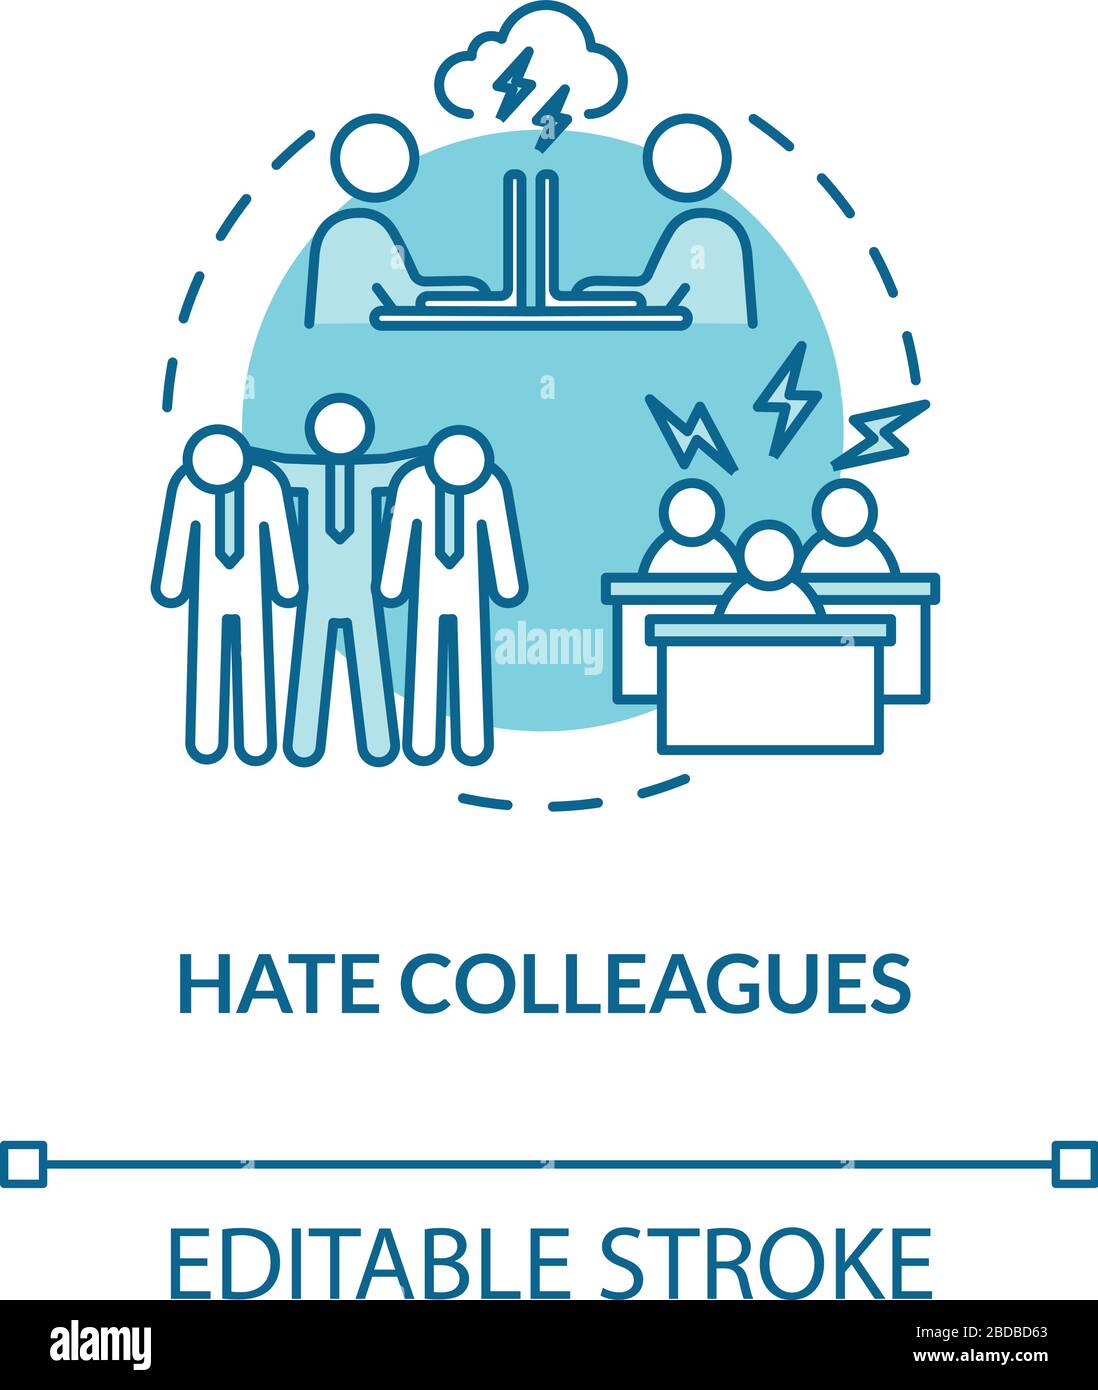 Hate colleagues turquoise concept icon. Angry with team. Displeased with coworkers. Burnout cause idea thin line illustration. Vector isolated outline Stock Vector